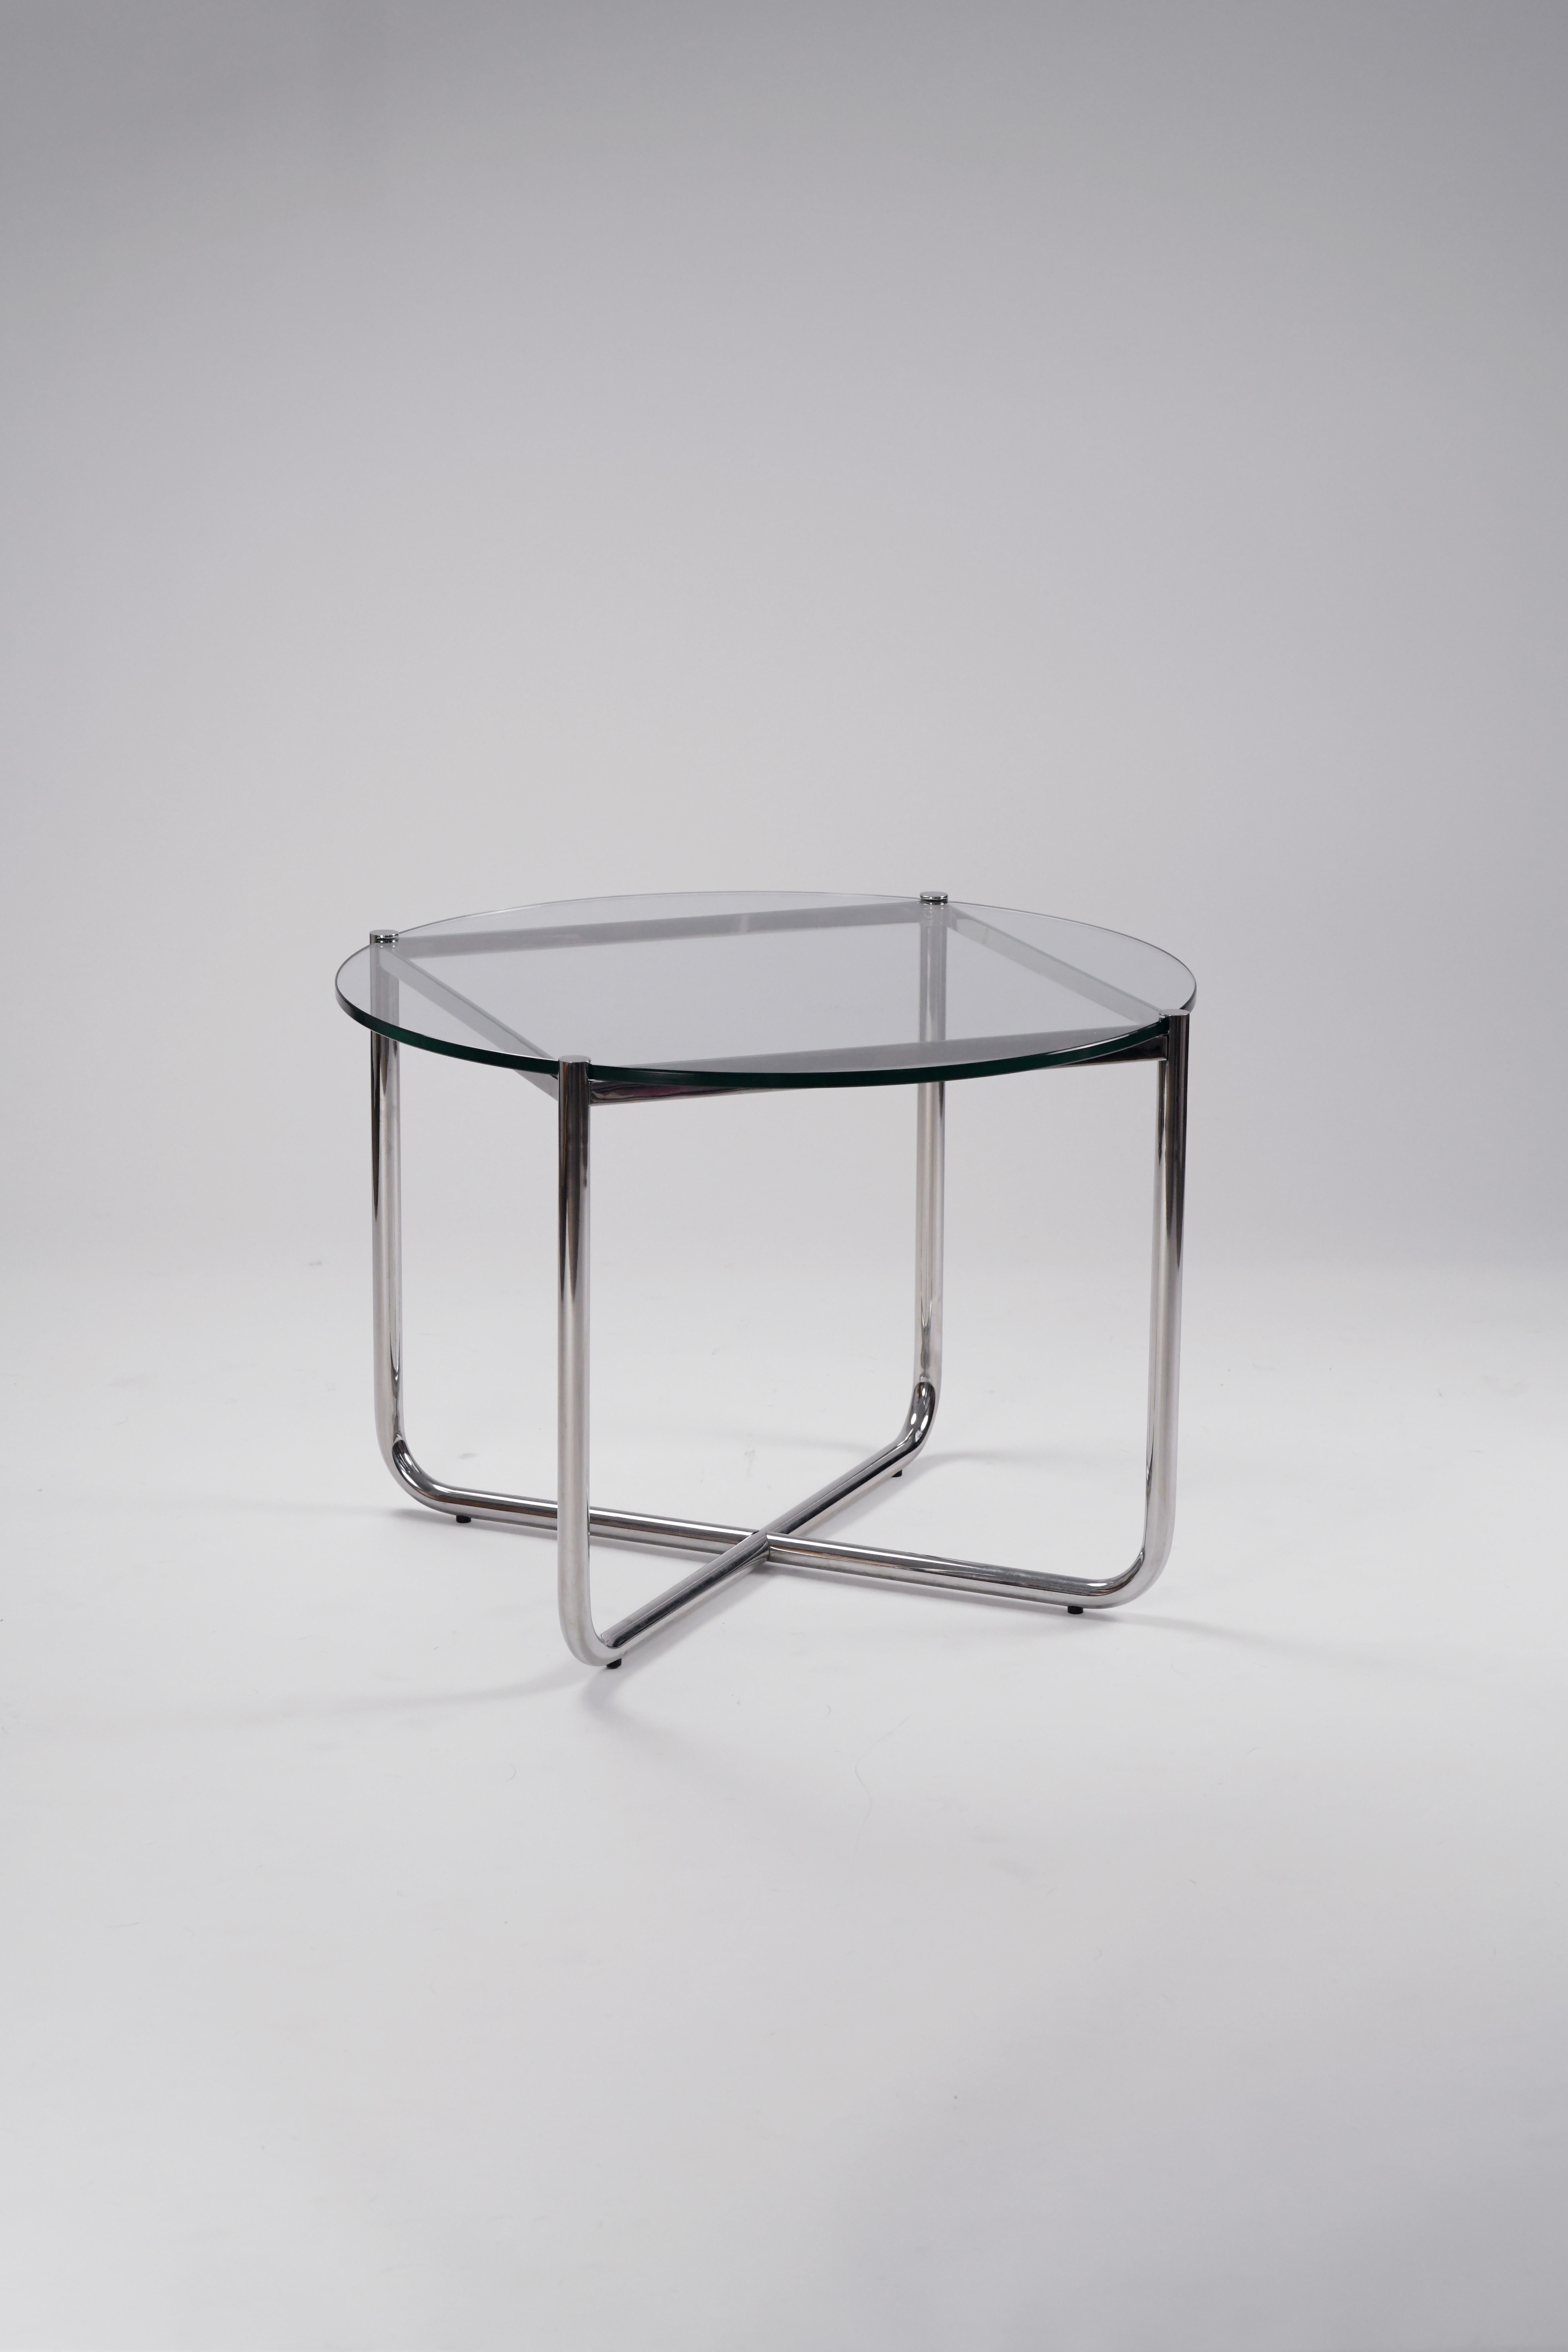 Beautiful MR side table by Mies Van der Rohe for Knoll. We believe these were produced sometime in the 80s or 90s. They are in good vintage condition with some minor pitting to the chrome bases and a couple small superficial scratches on the glass